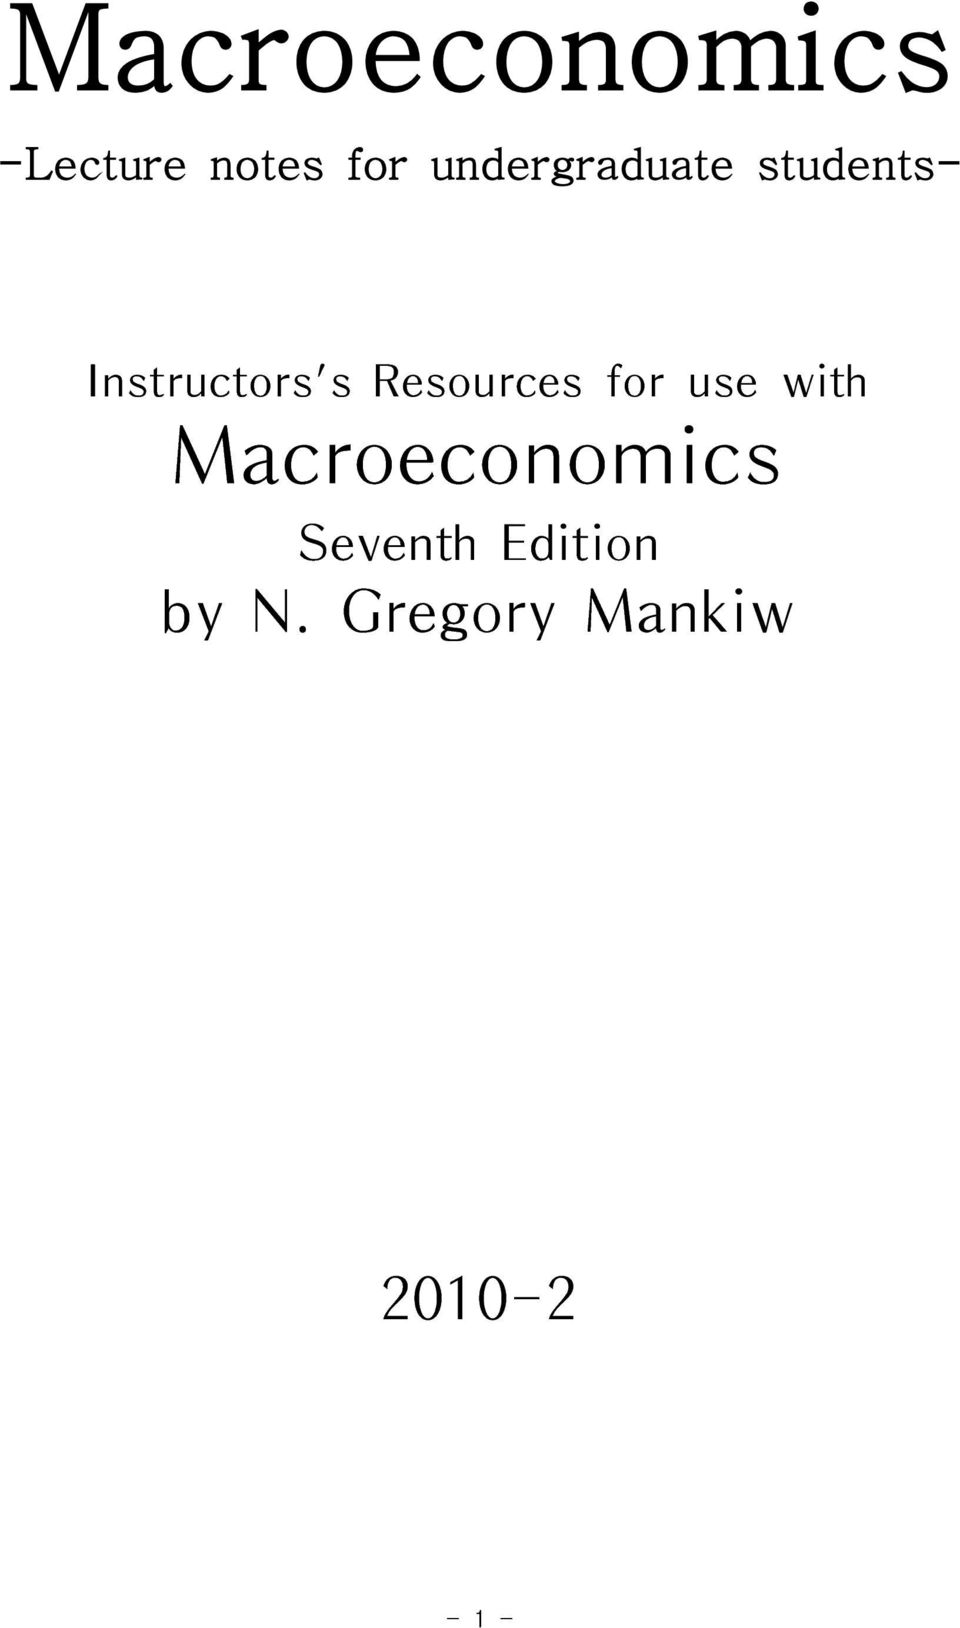 Resources for use with Macroeconomics